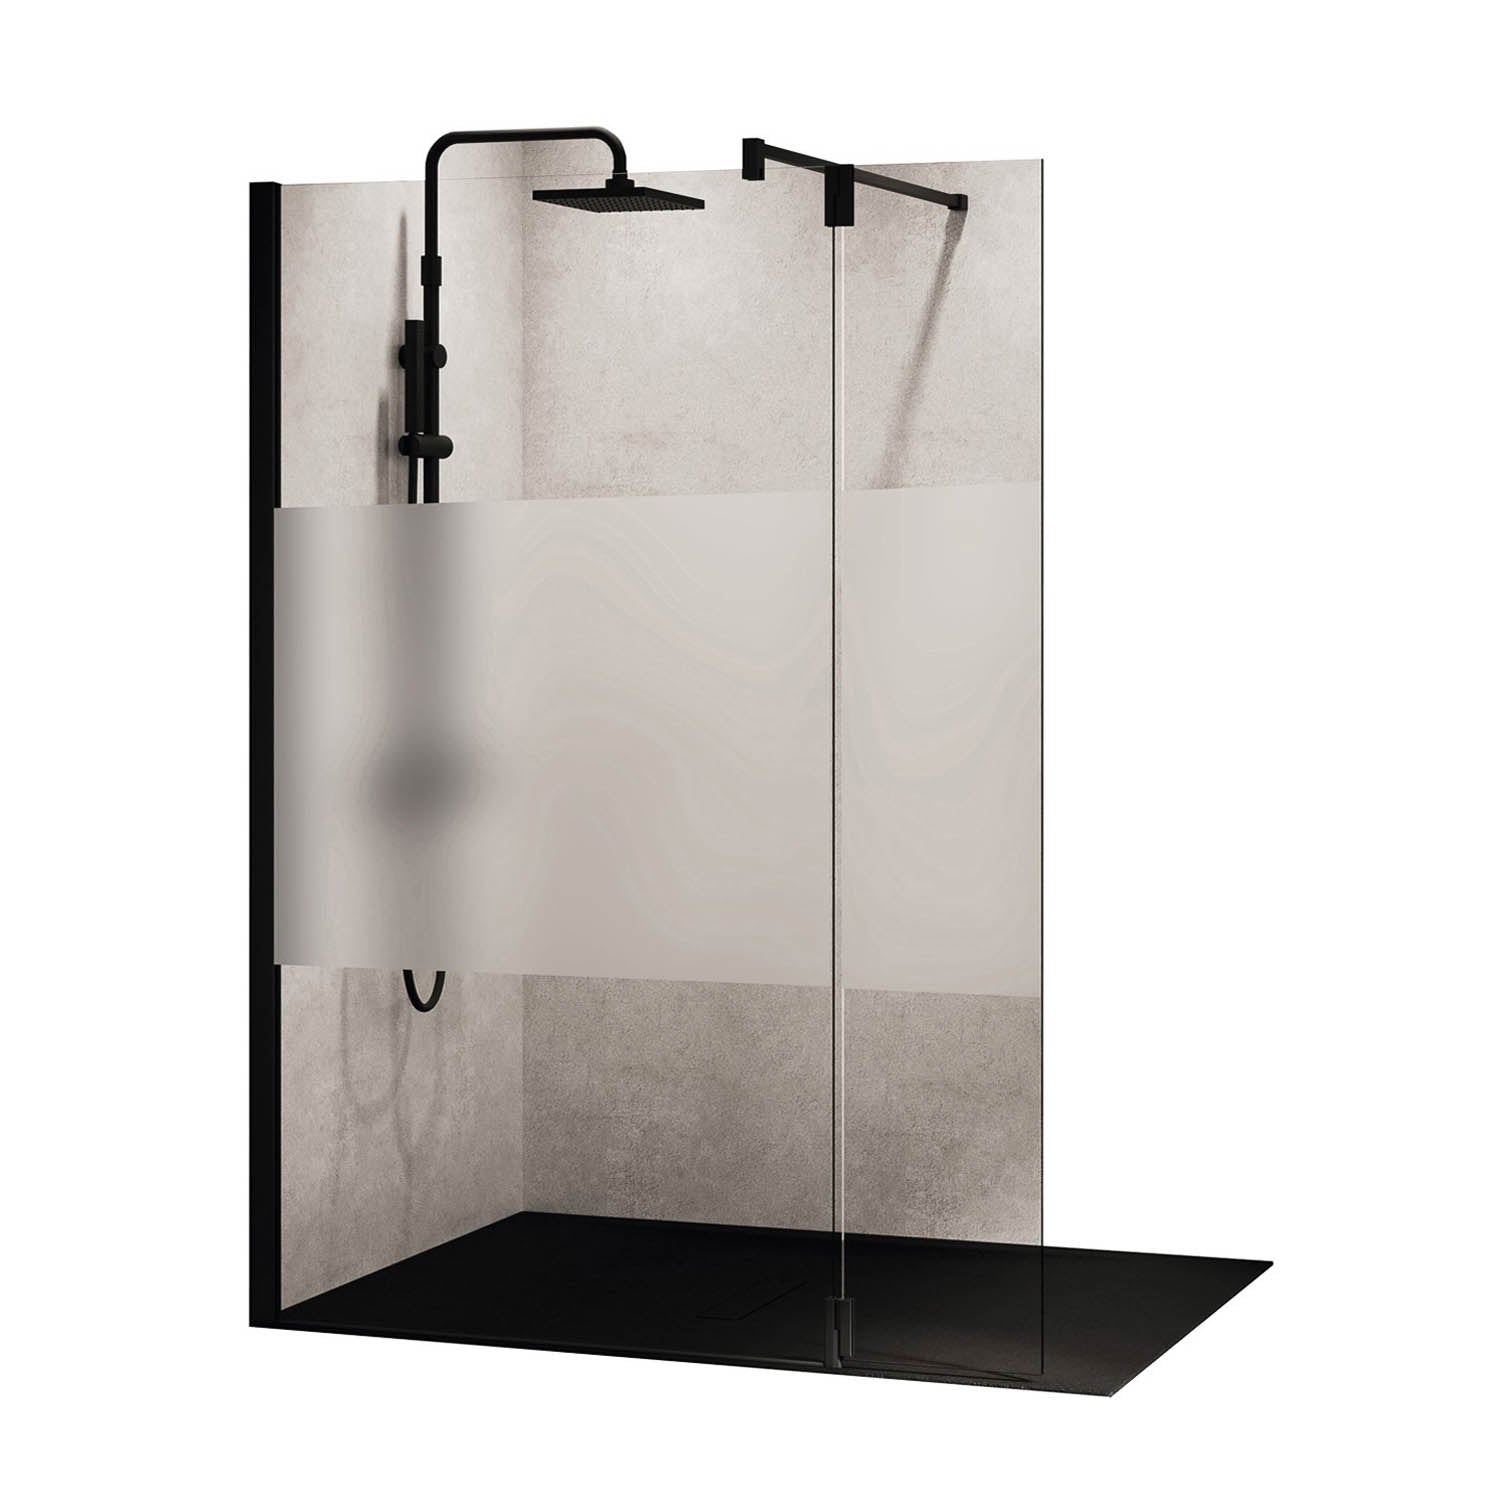 870-900mm Ergo Wet Room Screen Satin Band Glass with a matt black finish on a white background